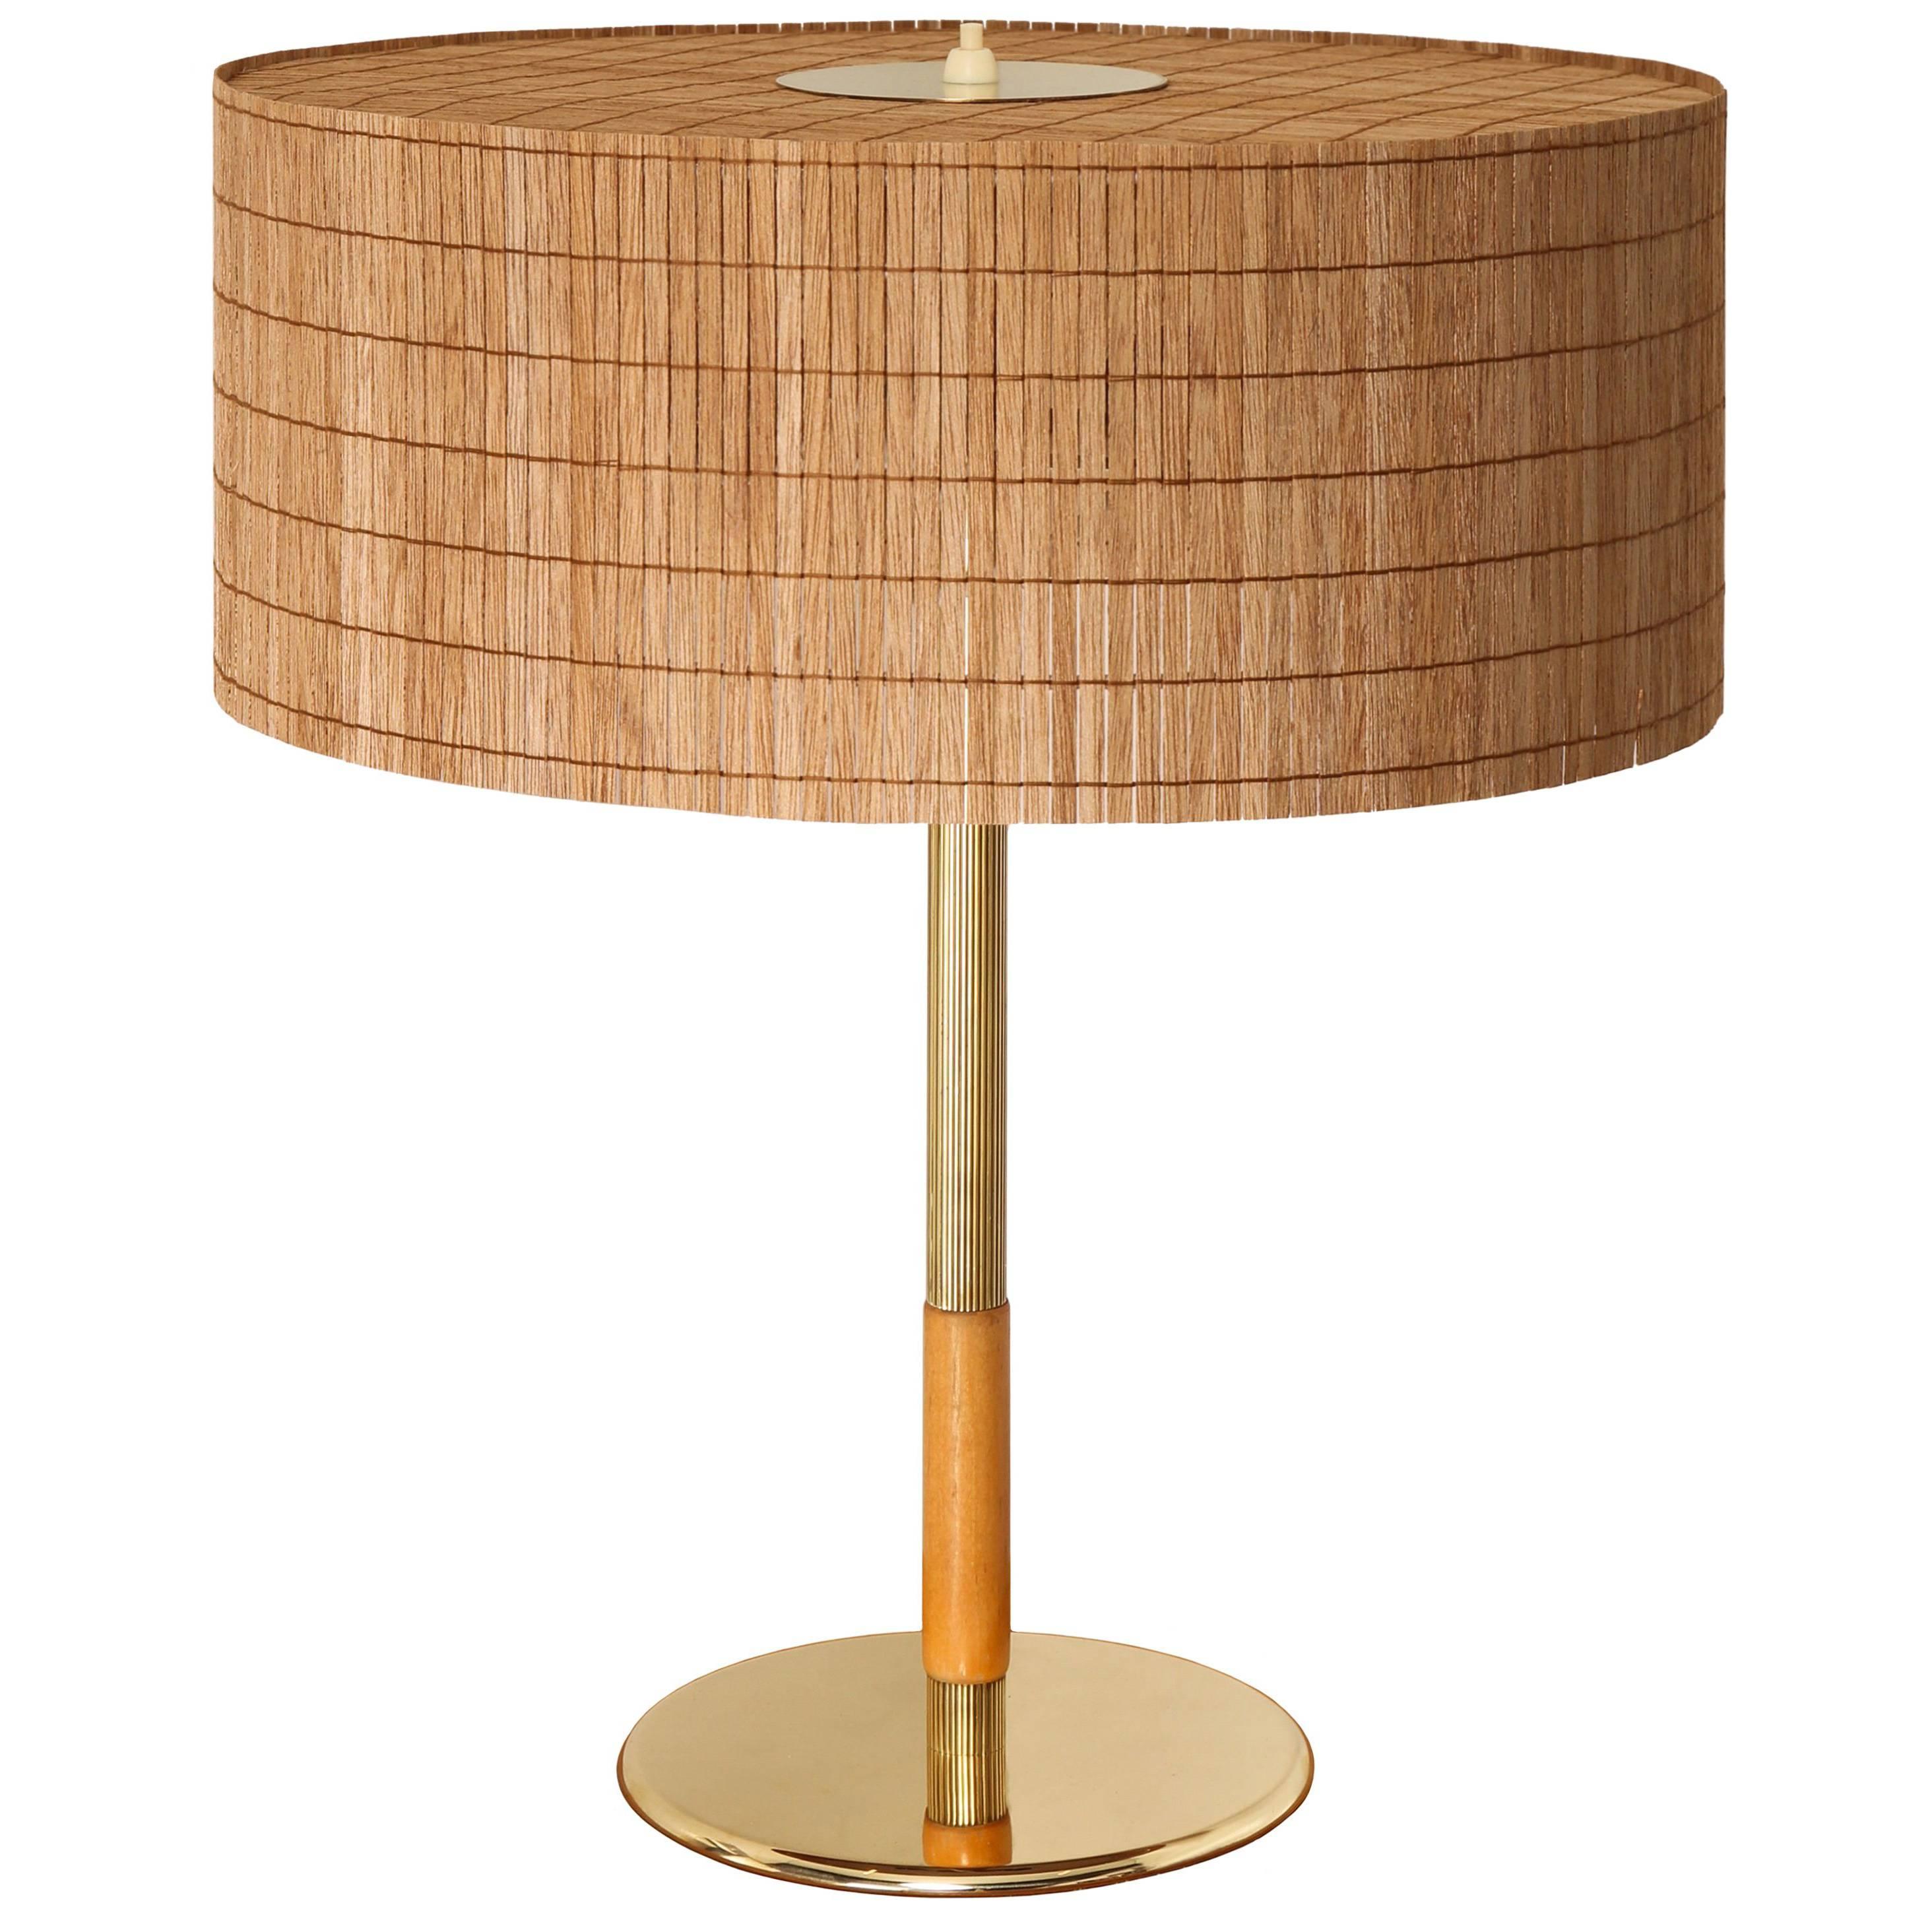 Paavo Tynell Table Lamp, Model 9206, Taito Oy, Finland, 1940s